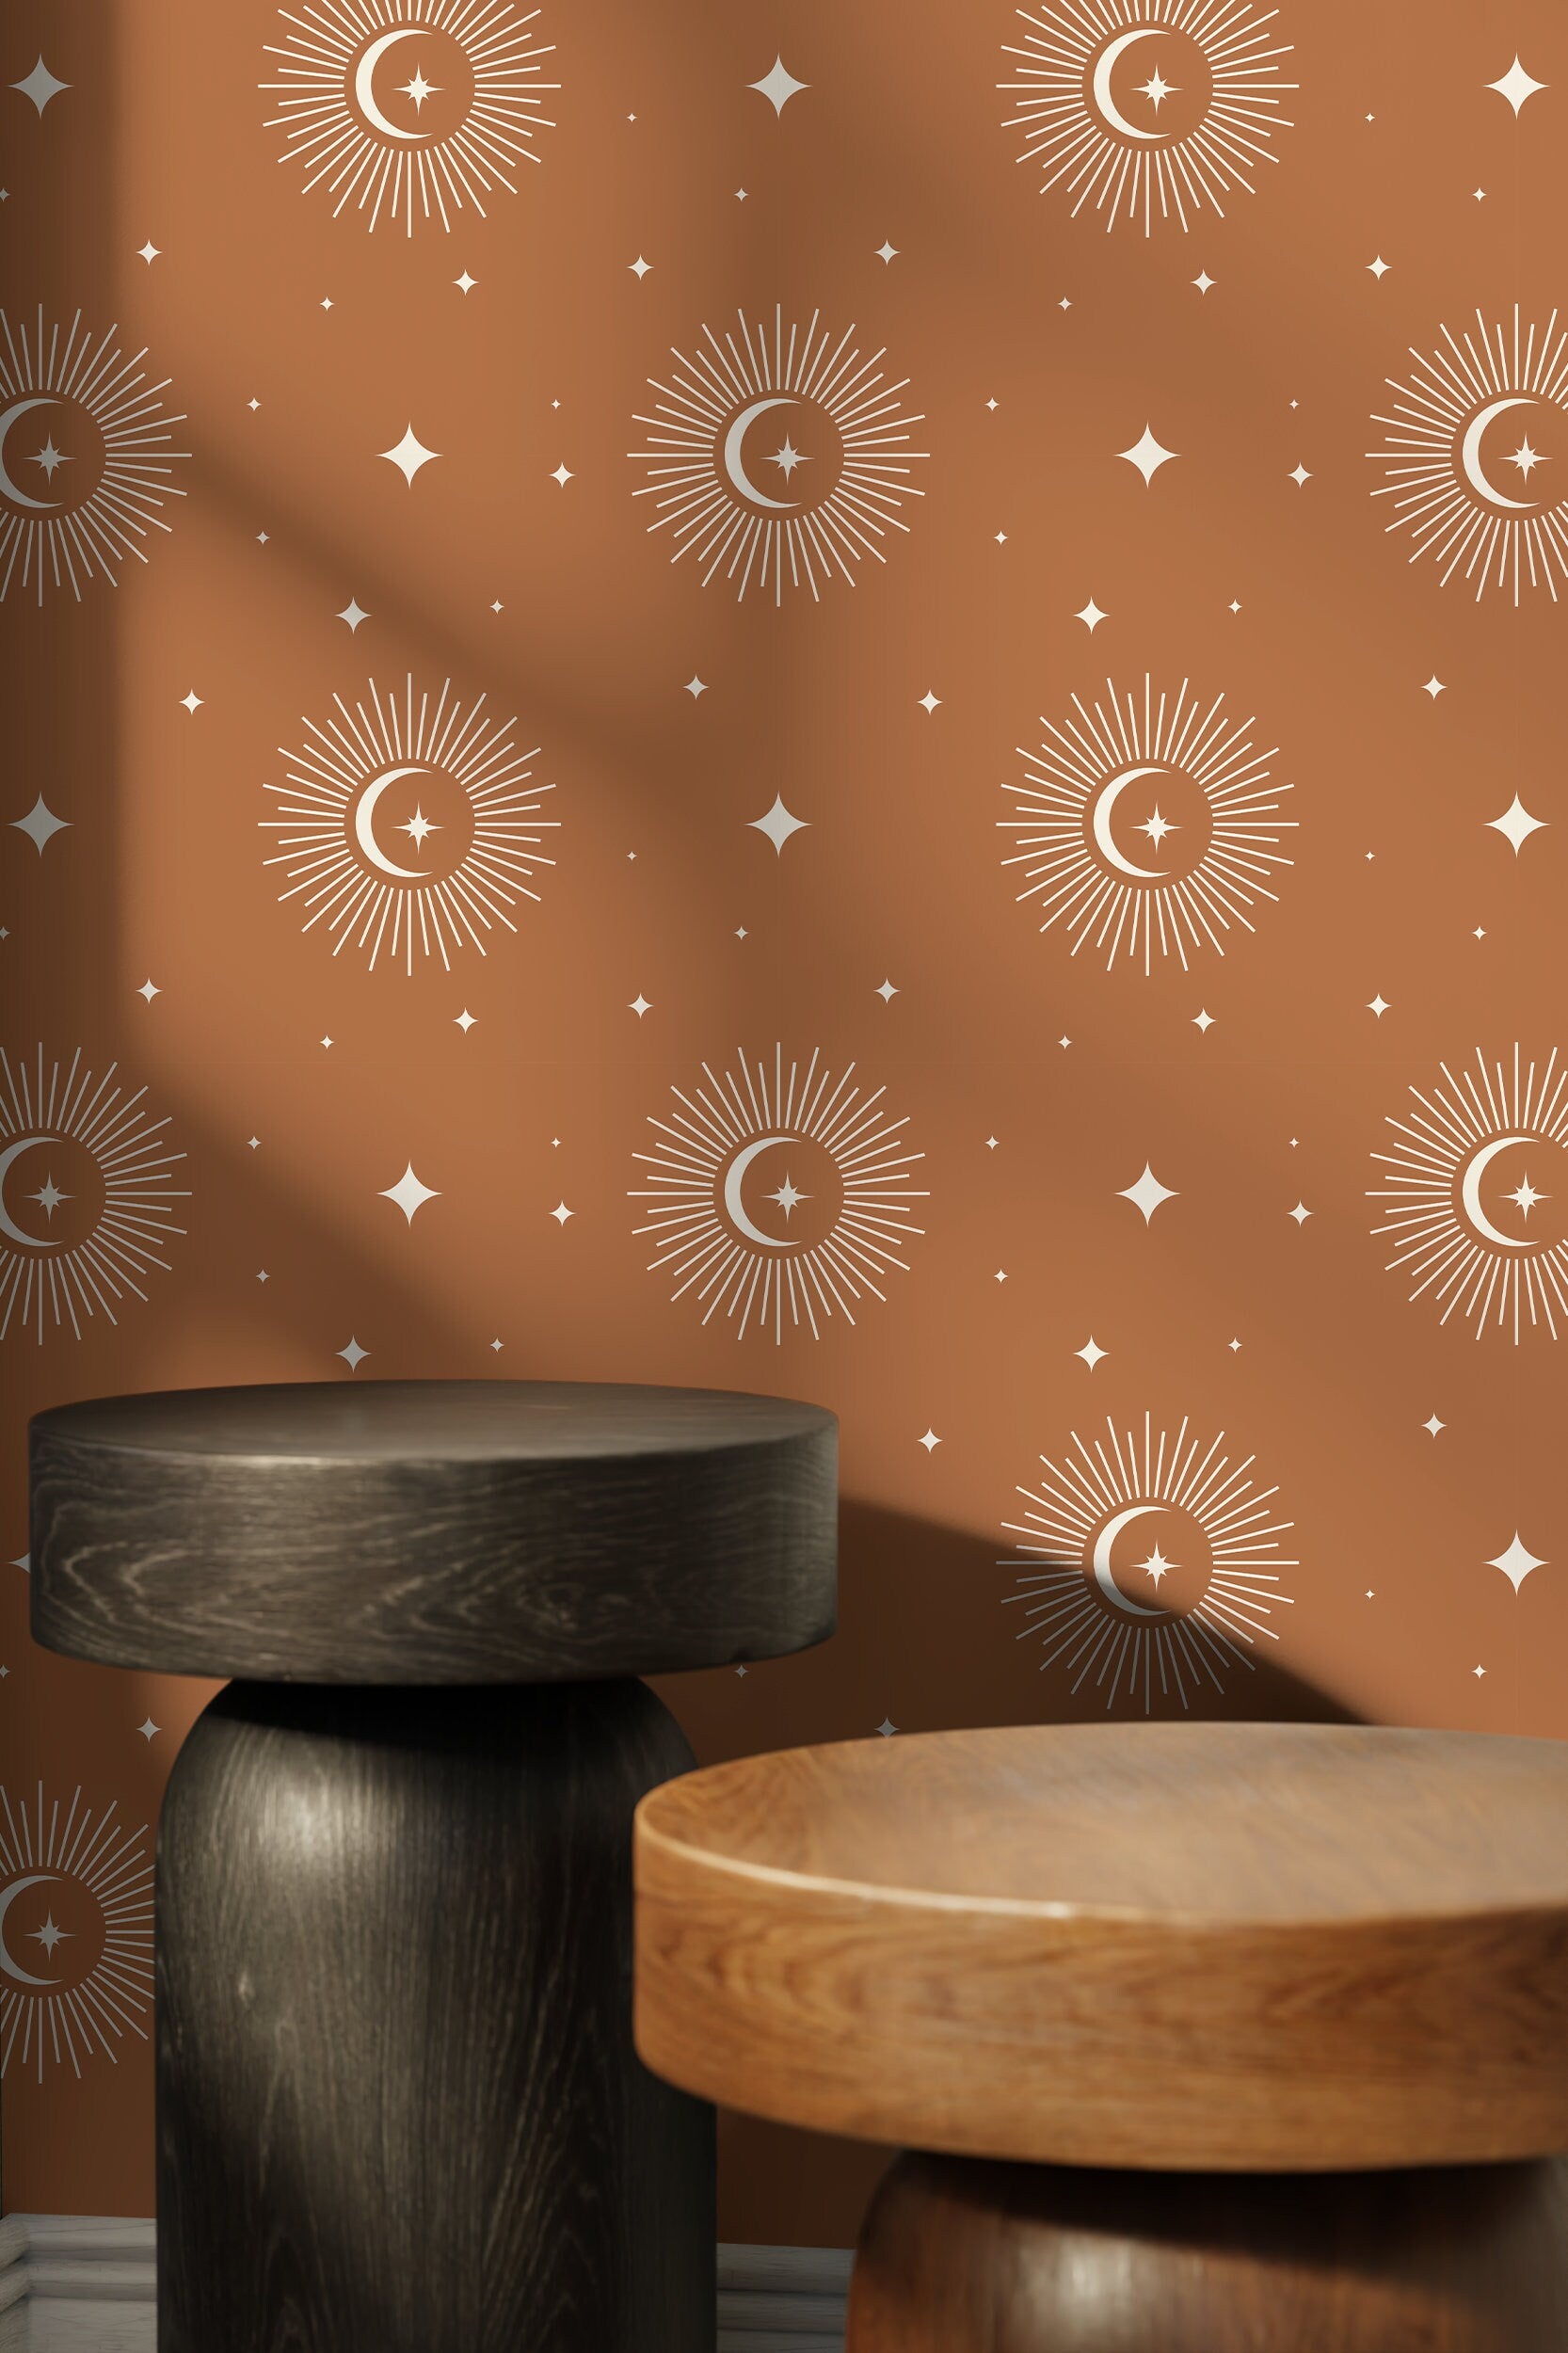 Mystique and Celestial Wallpaper Removable Peel and Stick Wallpaper Peel and Stick Wallpaper Moon and Magic - ZAAR